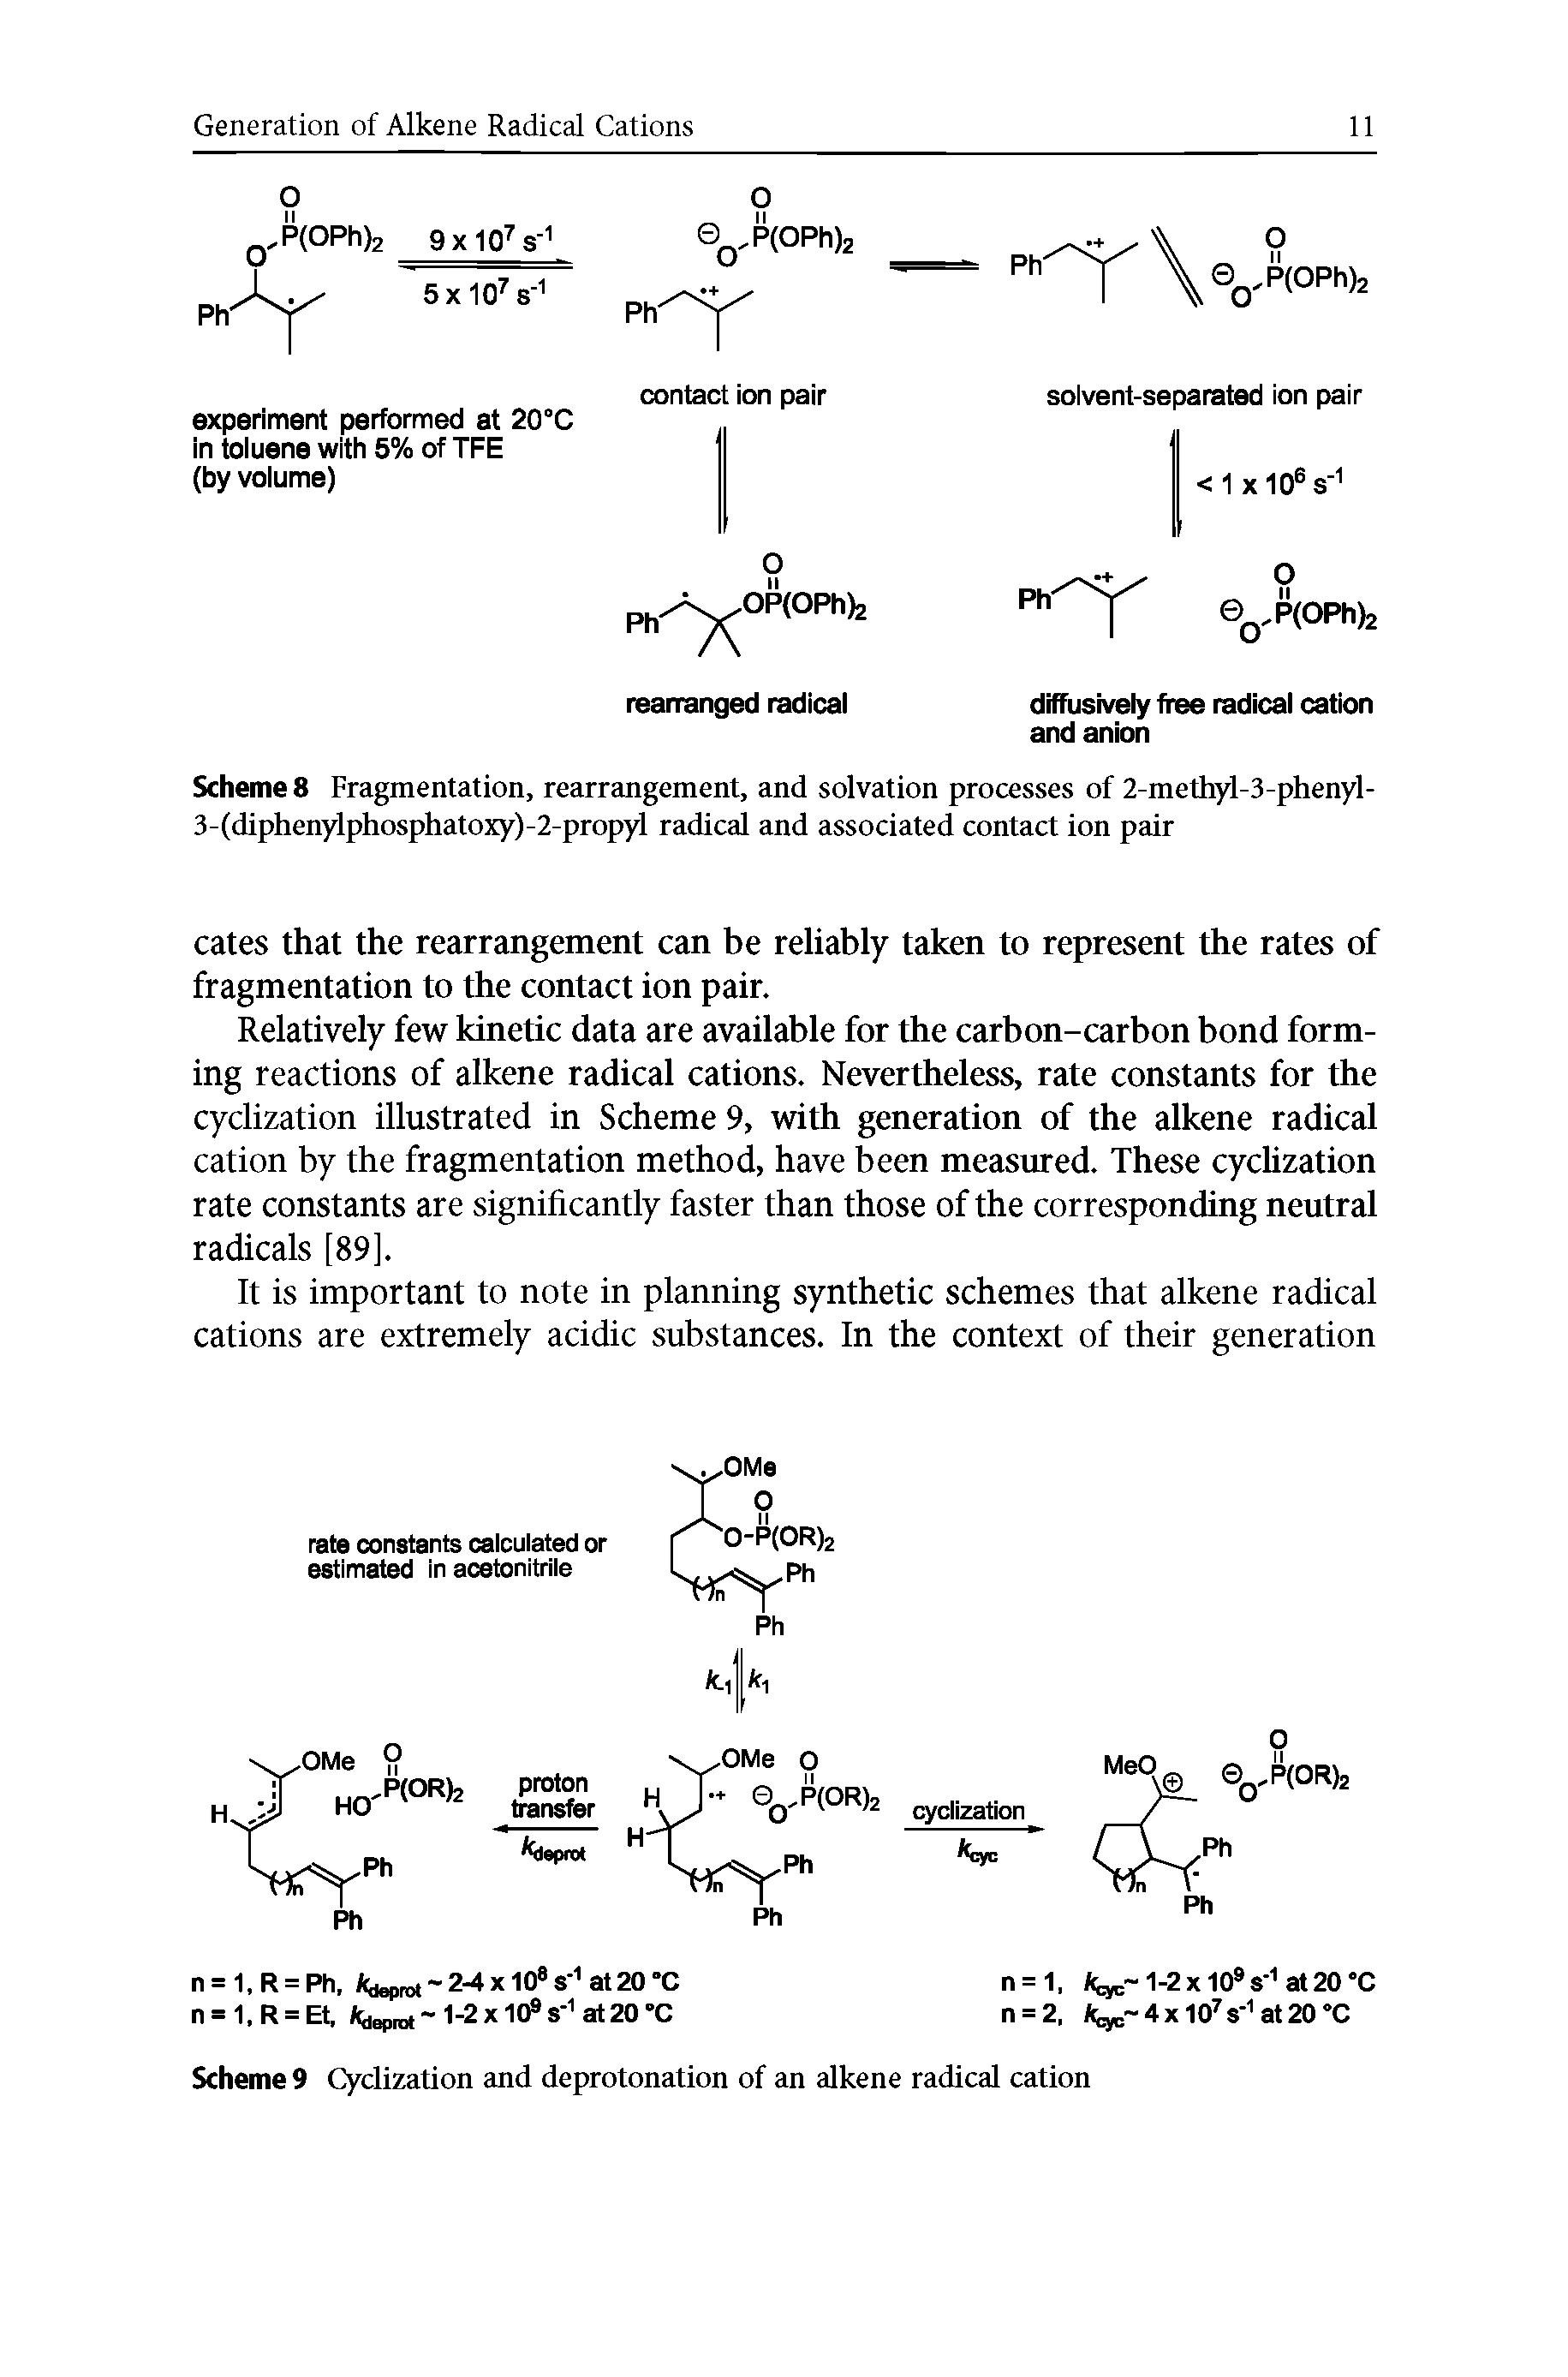 Scheme 8 Fragmentation, rearrangement, and solvation processes of 2-methyl-3-phenyl-3-(diphenylphosphatoxy)-2-propyl radical and associated contact ion pair...